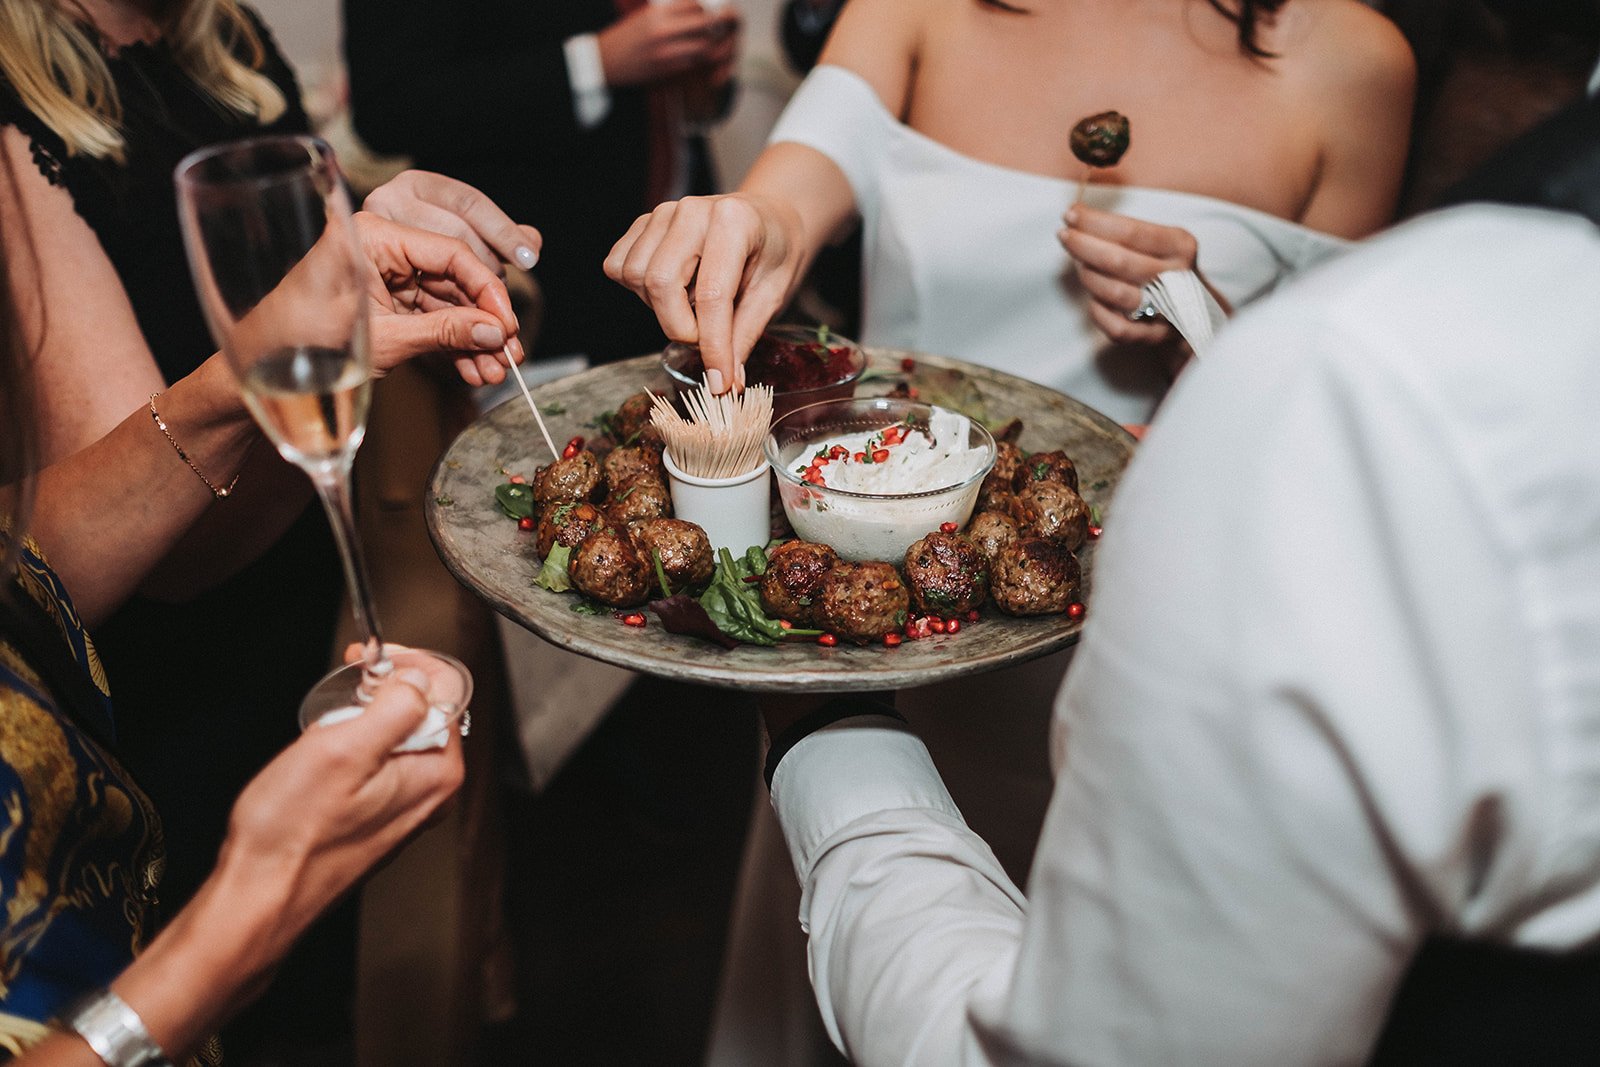  The wedding photographer has focused on the canapes which are being handed out by a member of the waiting staff wearing a crisp white shirt, The bride is reaching for a cocktail stick from the pot which has been placed amongst the meatballs and othe